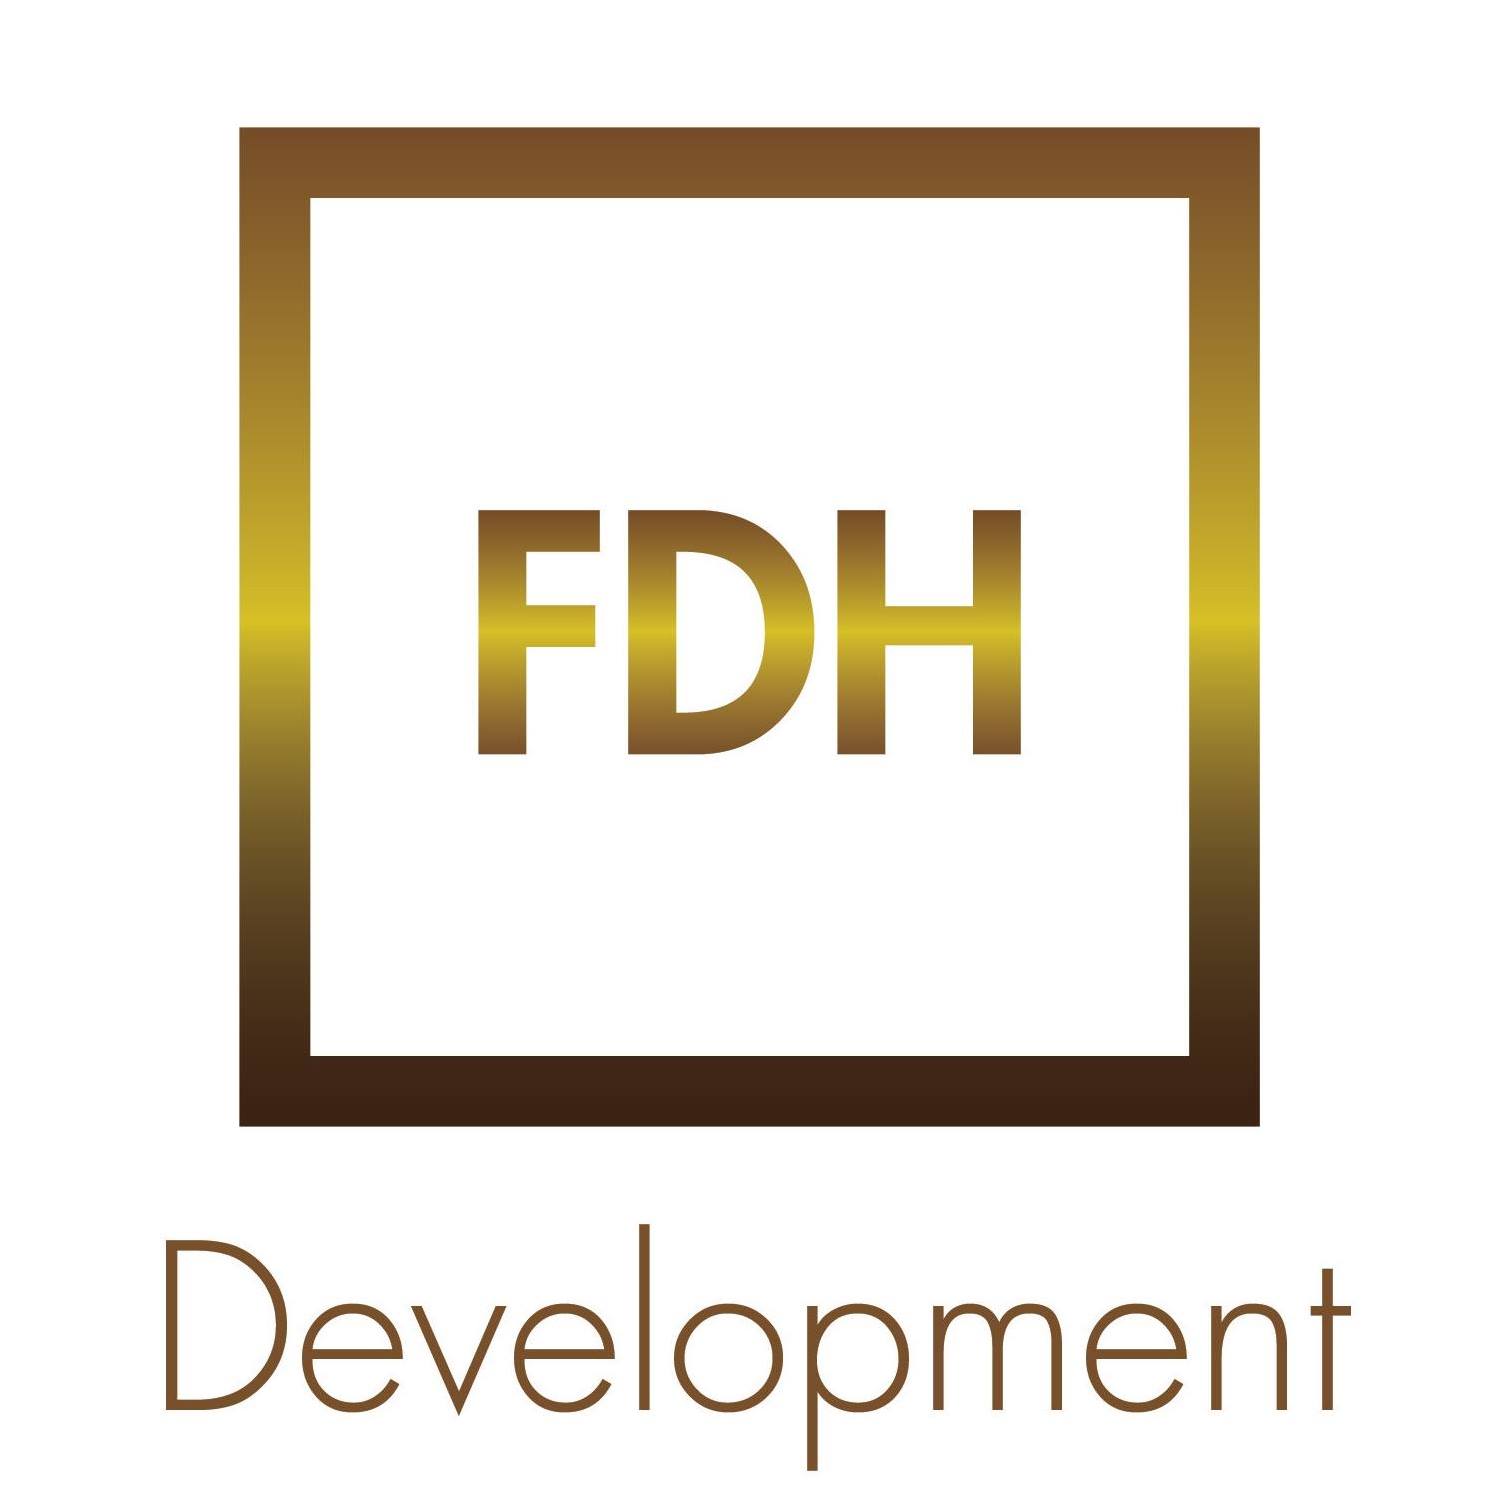 Future Developments Holdings (Pvt.) Limited